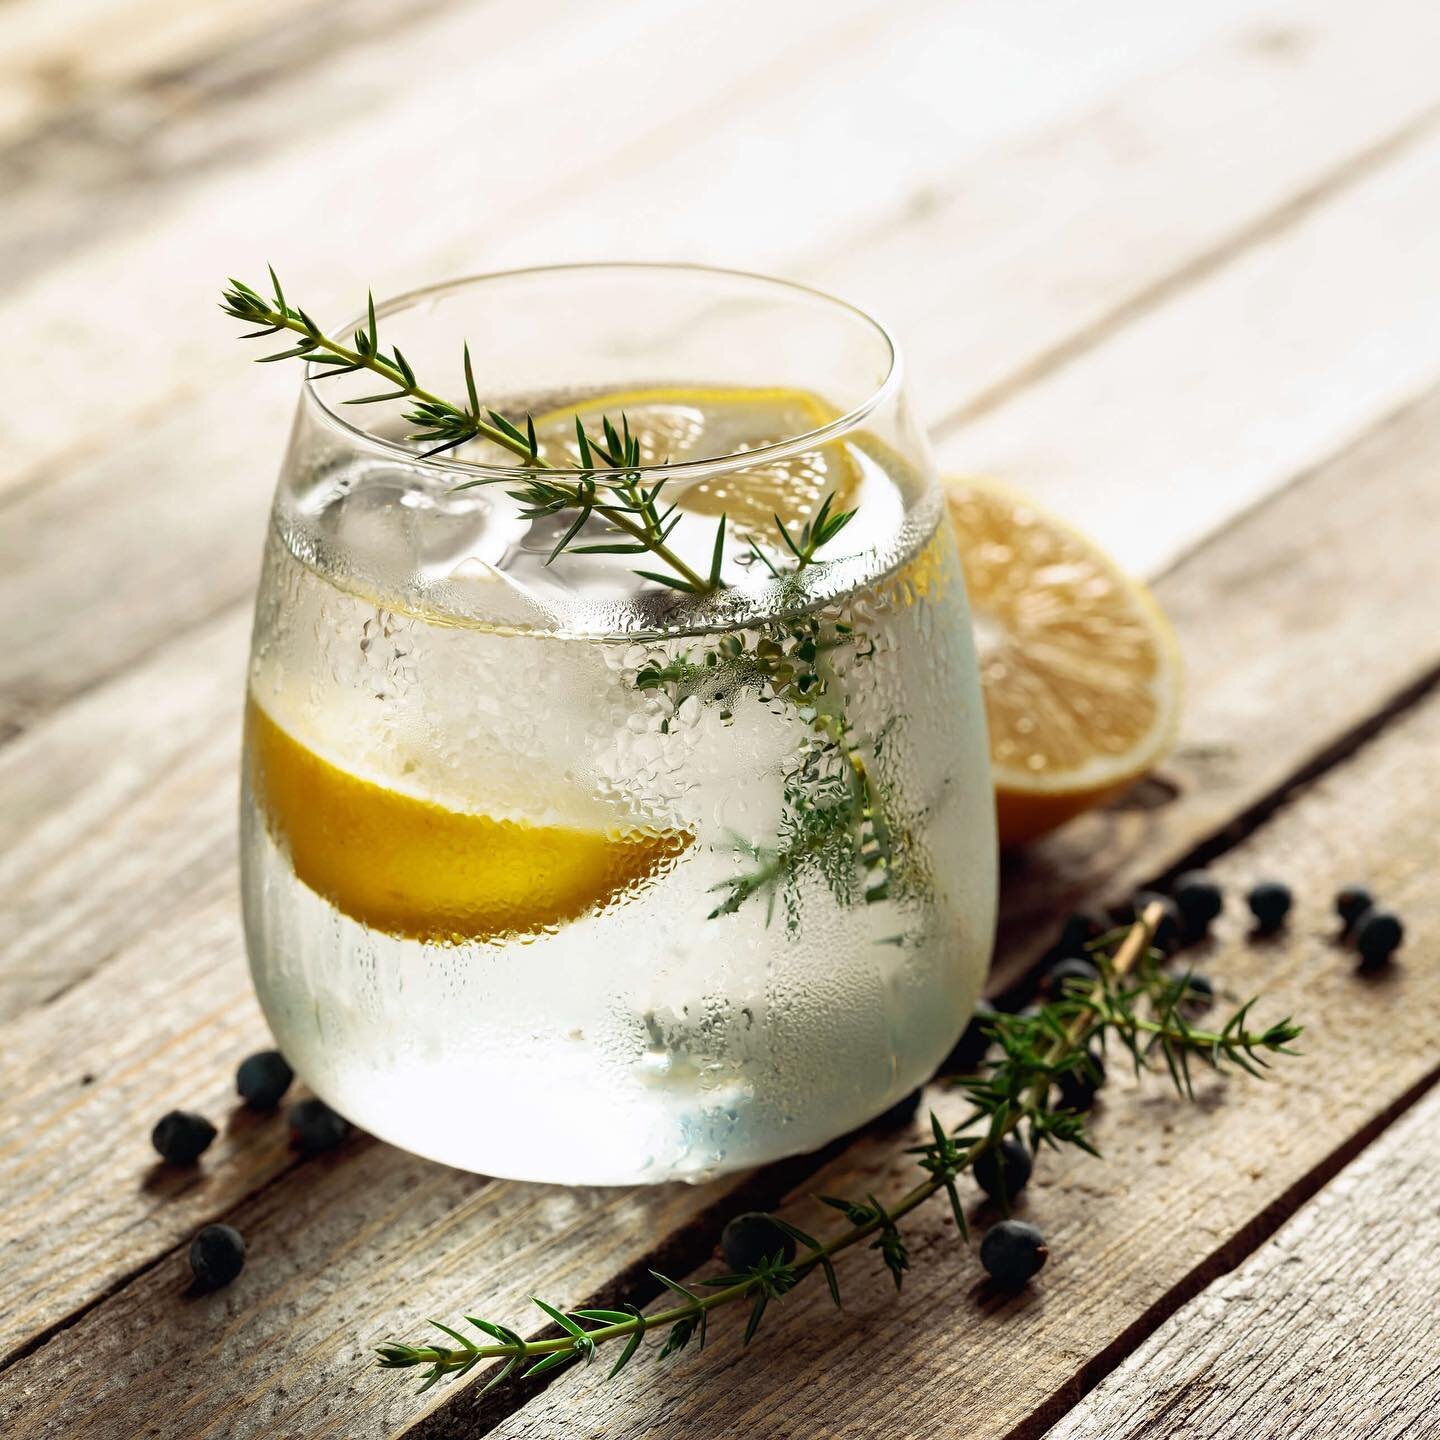 Tonight we host another virtual gin tasting experience for @mastercarduk #priceless.

Up for discussion will the health &lsquo;benefits&rsquo; of the humble gin and tonic. 😉

We will be going back in time to explore how distilled alcohol was origina